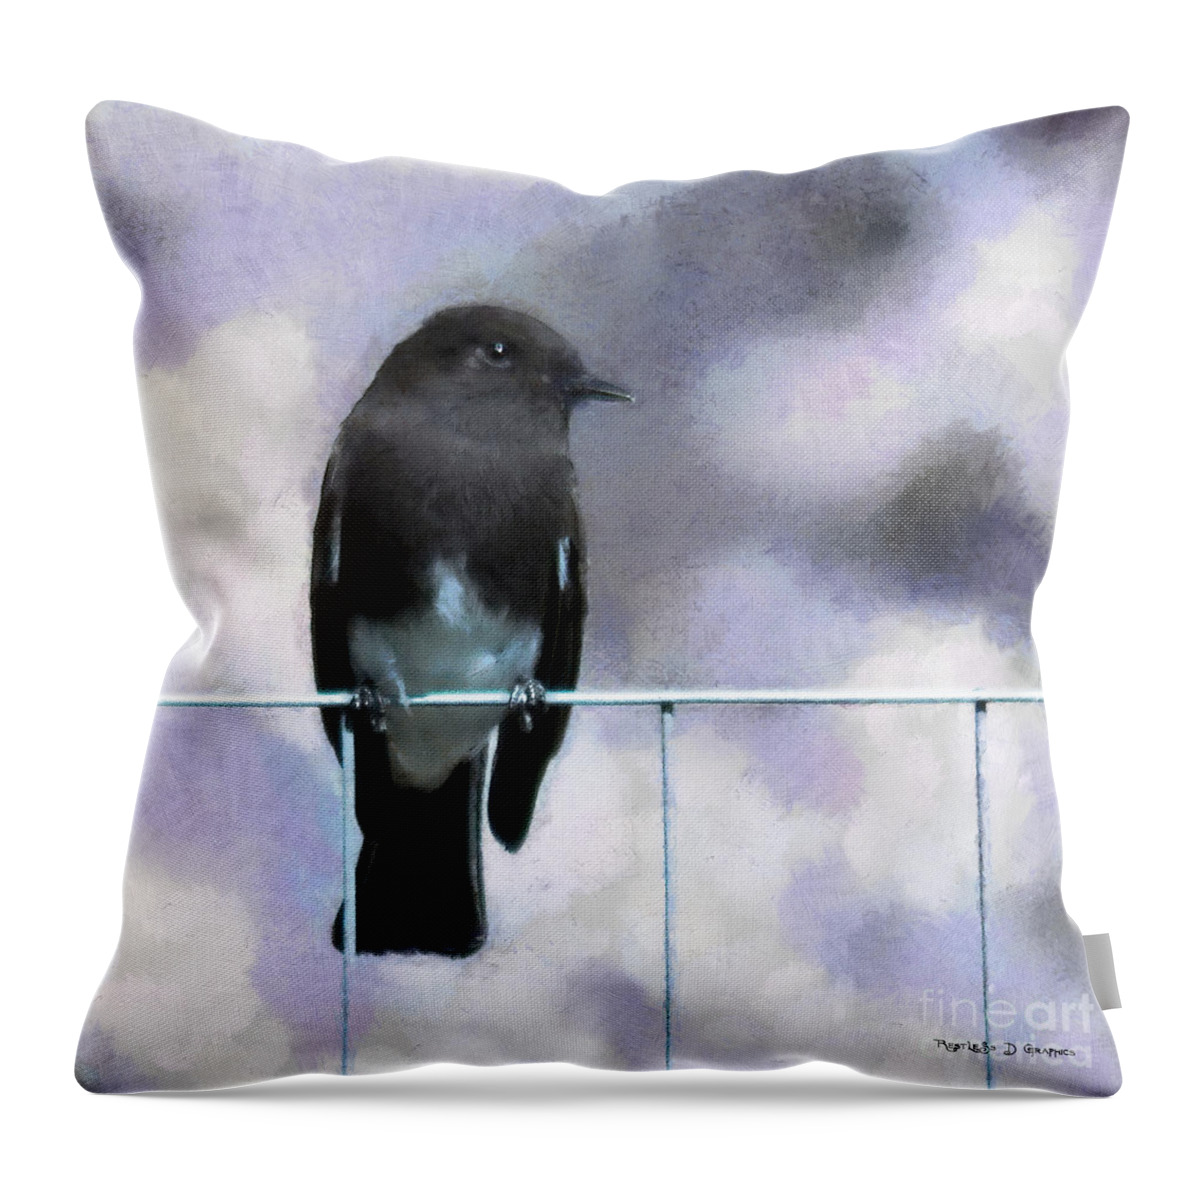 Azz Throw Pillow featuring the digital art Little Black Phoebe by Rhonda Strickland